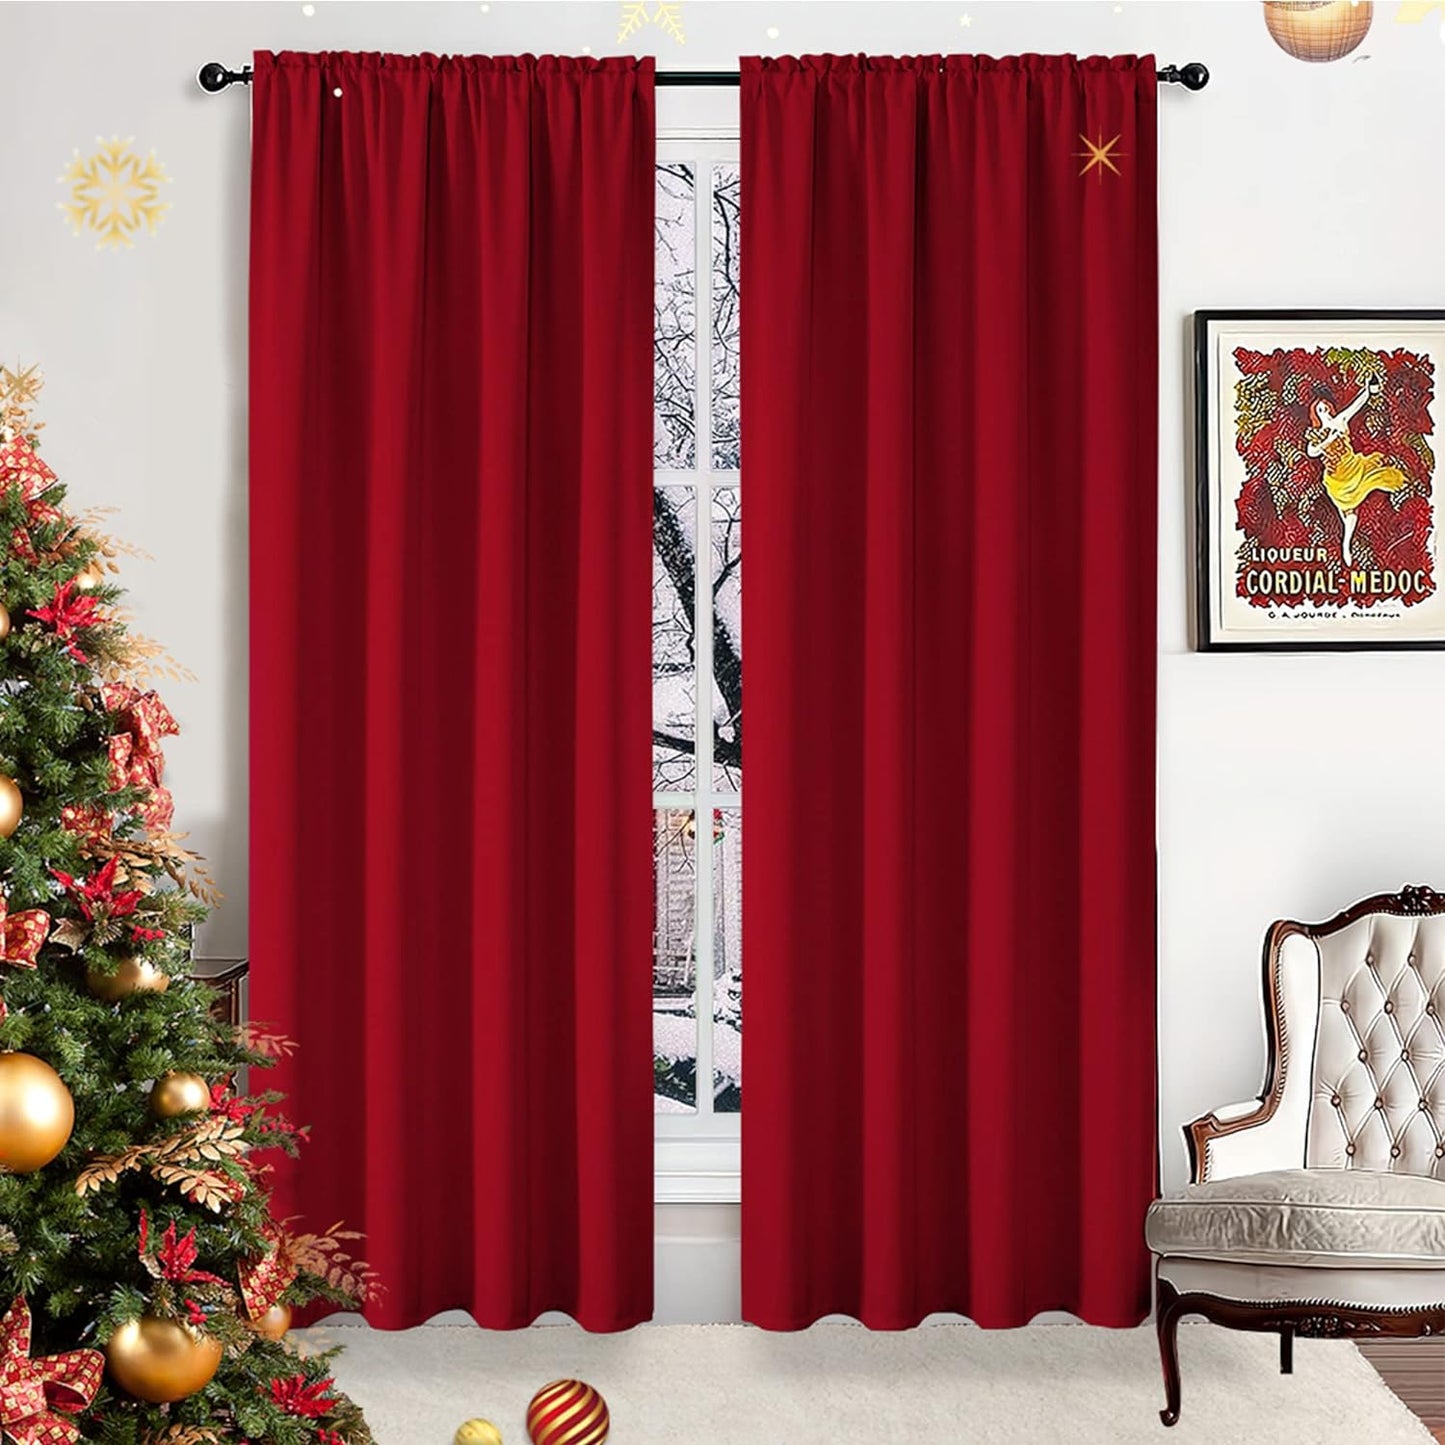 CUCRAF Blackout Curtains 84 Inches Long for Living Room, Light Beige Room Darkening Window Curtain Panels, Rod Pocket Thermal Insulated Solid Drapes for Bedroom, 52X84 Inch, Set of 2 Panels  CUCRAF Red 52W X 95L Inch 2 Panels 